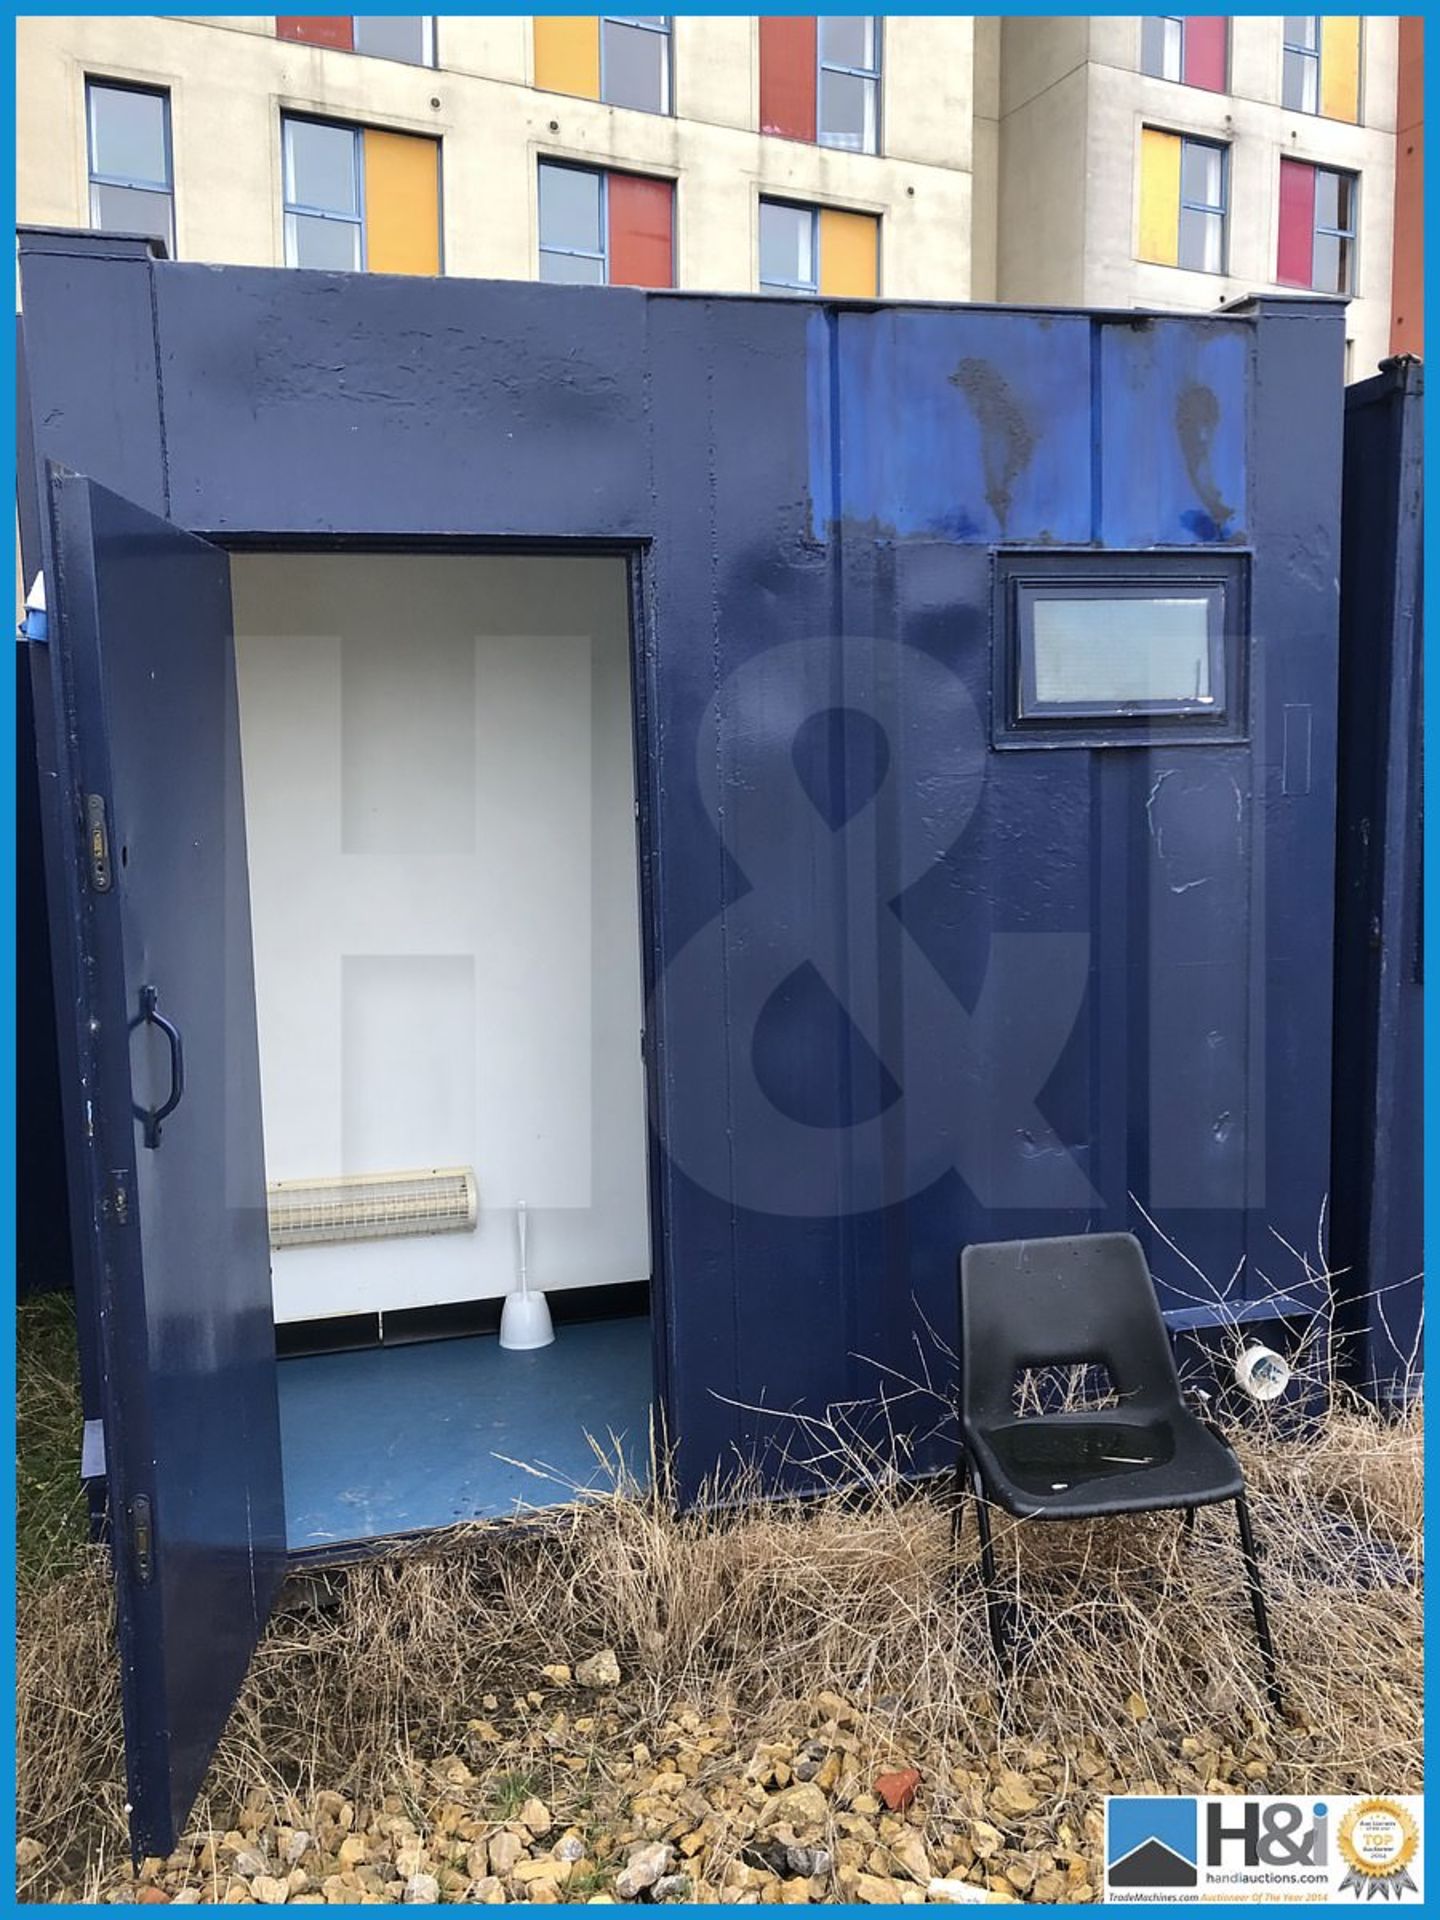 Appx 11ft x 9ft site both sex toilet block cabin in excellent condition throughout. Access for a hia - Image 2 of 10